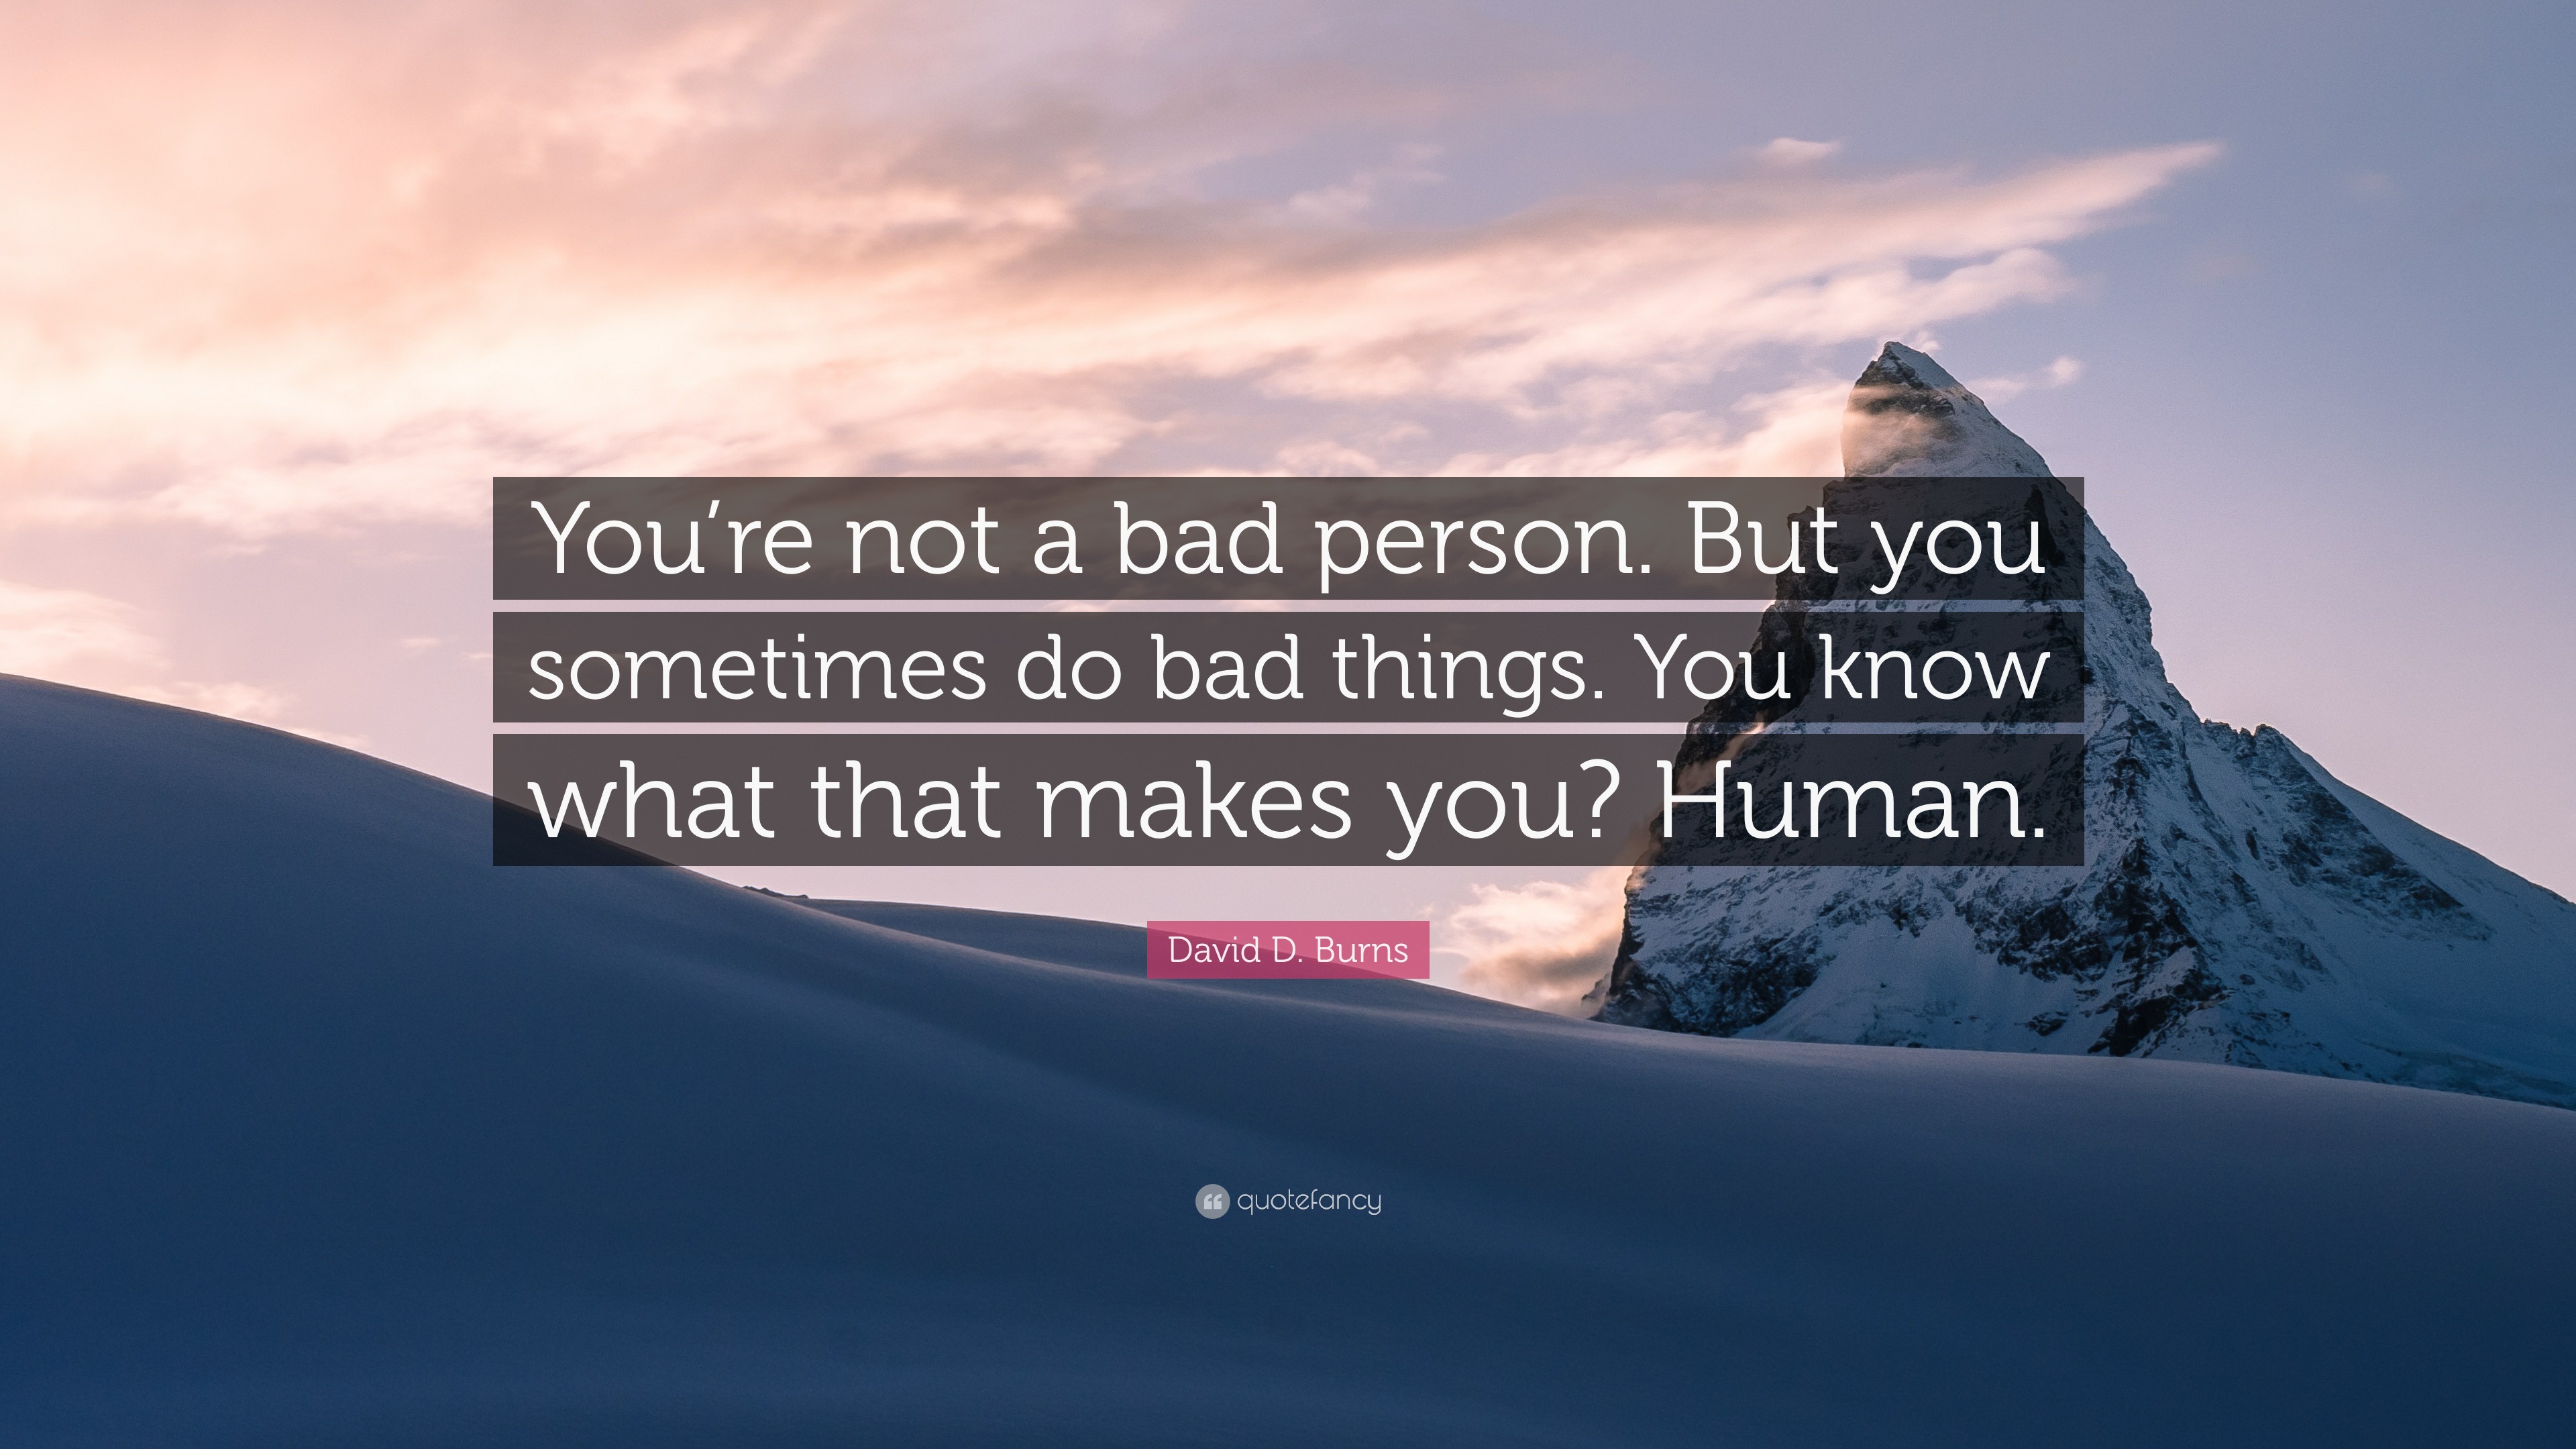 David D. Burns Quote: “You're not a bad person. But you sometimes